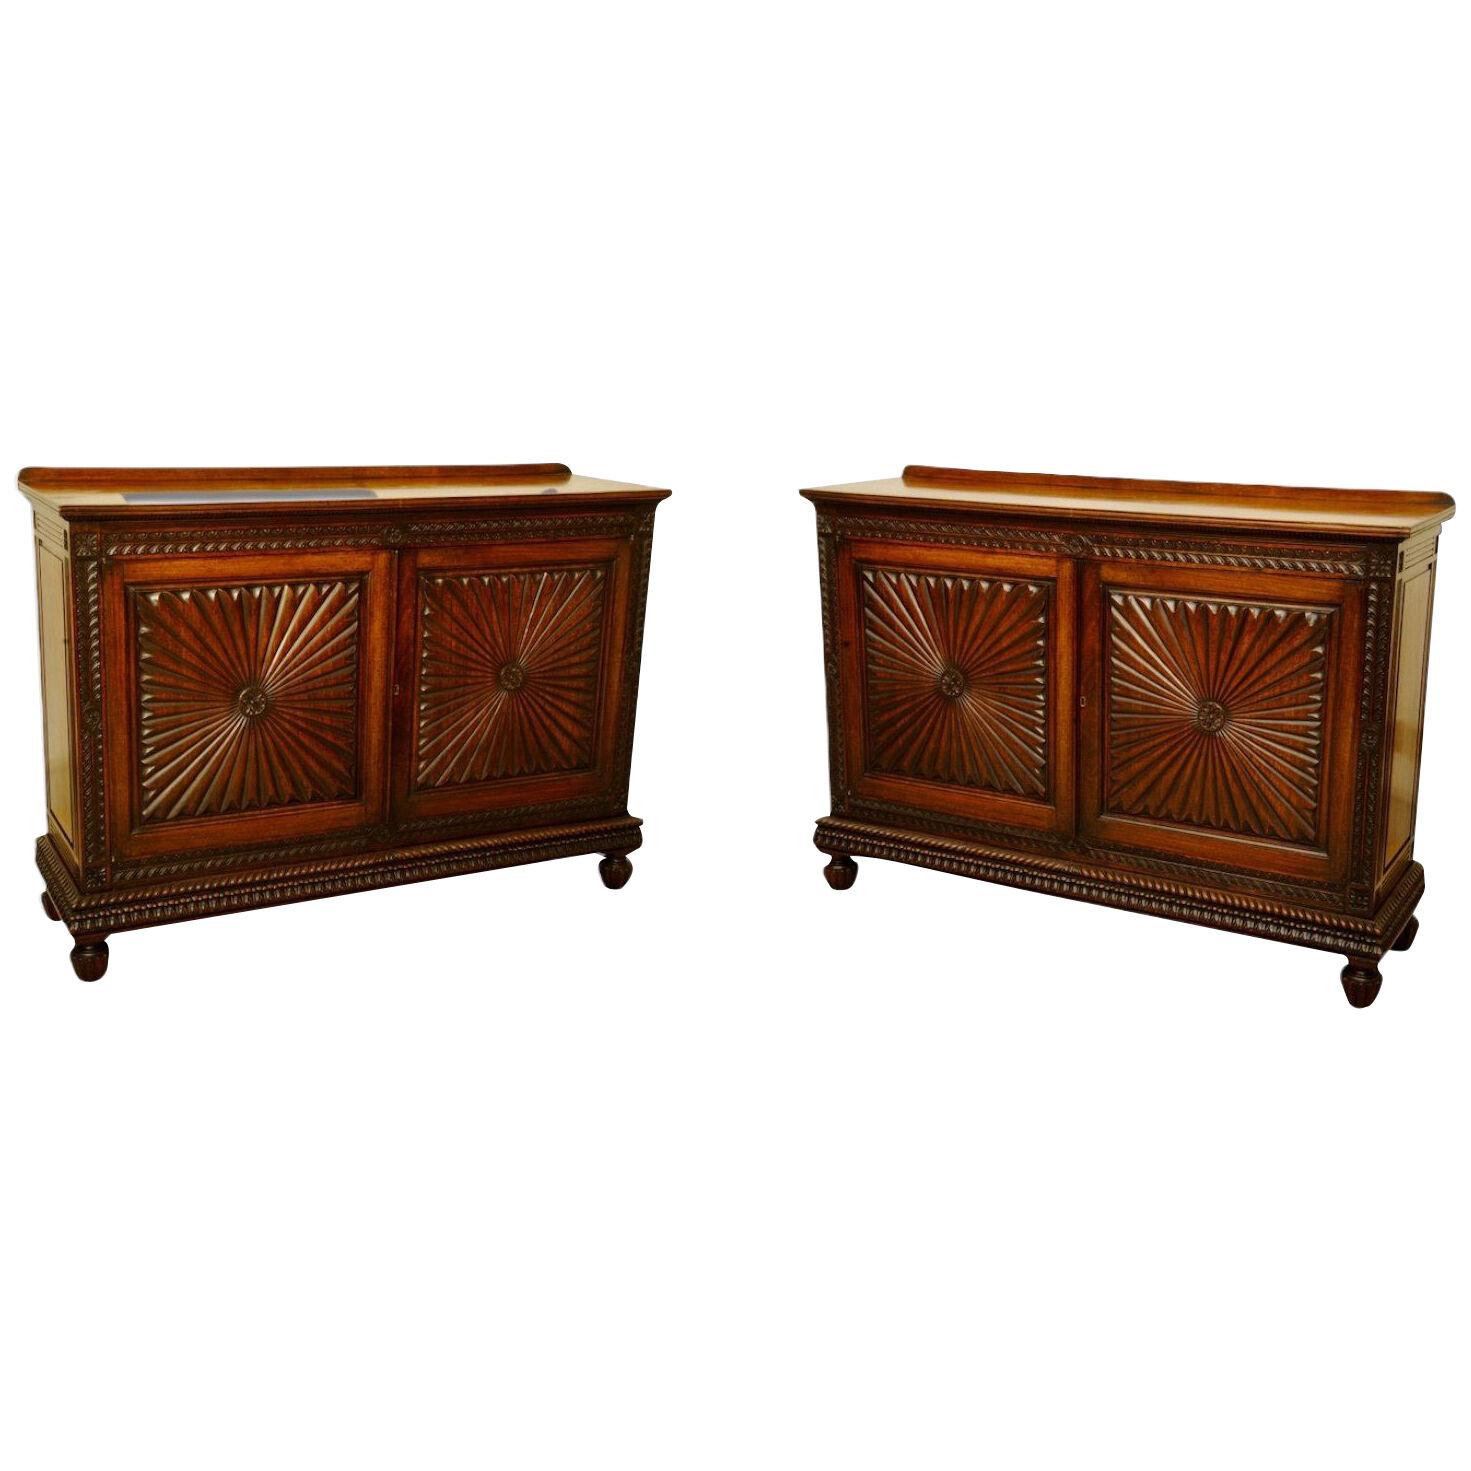 WONDERFUL PAIR OF ANGLO INDIAN SIDE CABINETS